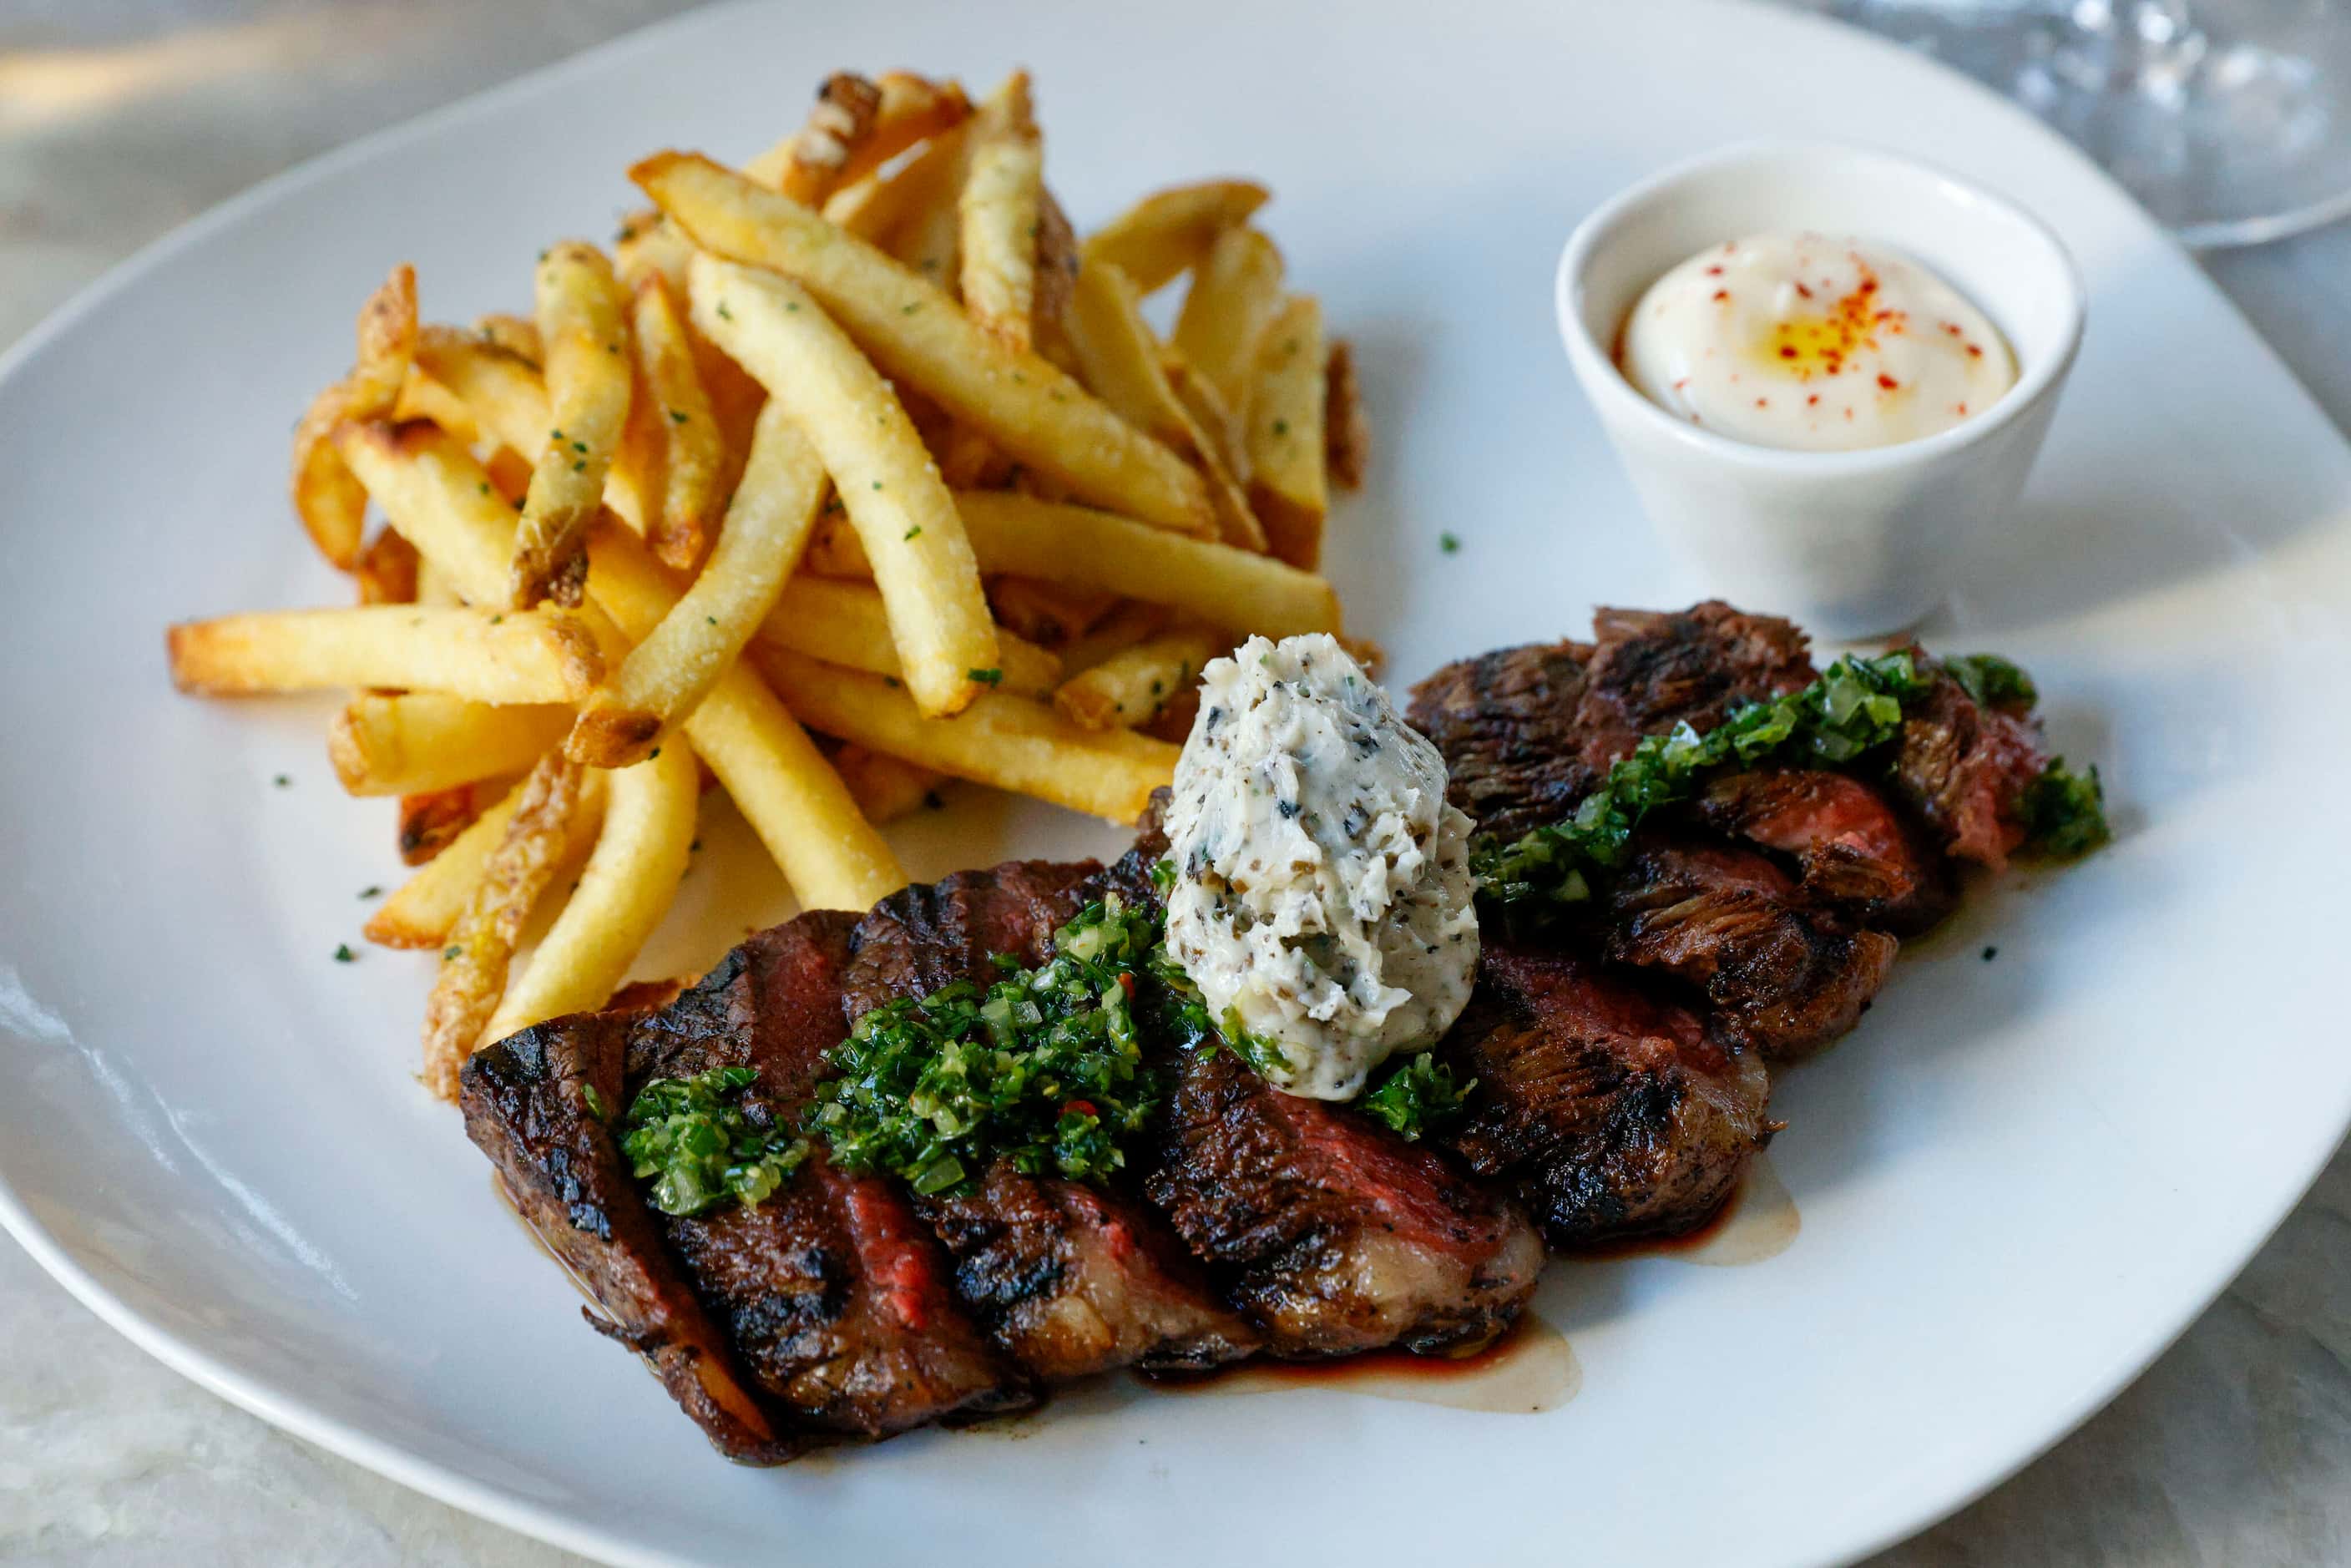 Steak frites pictured at Mirador restaurant in downtown Dallas, Tuesday, Nov. 28, 2023.